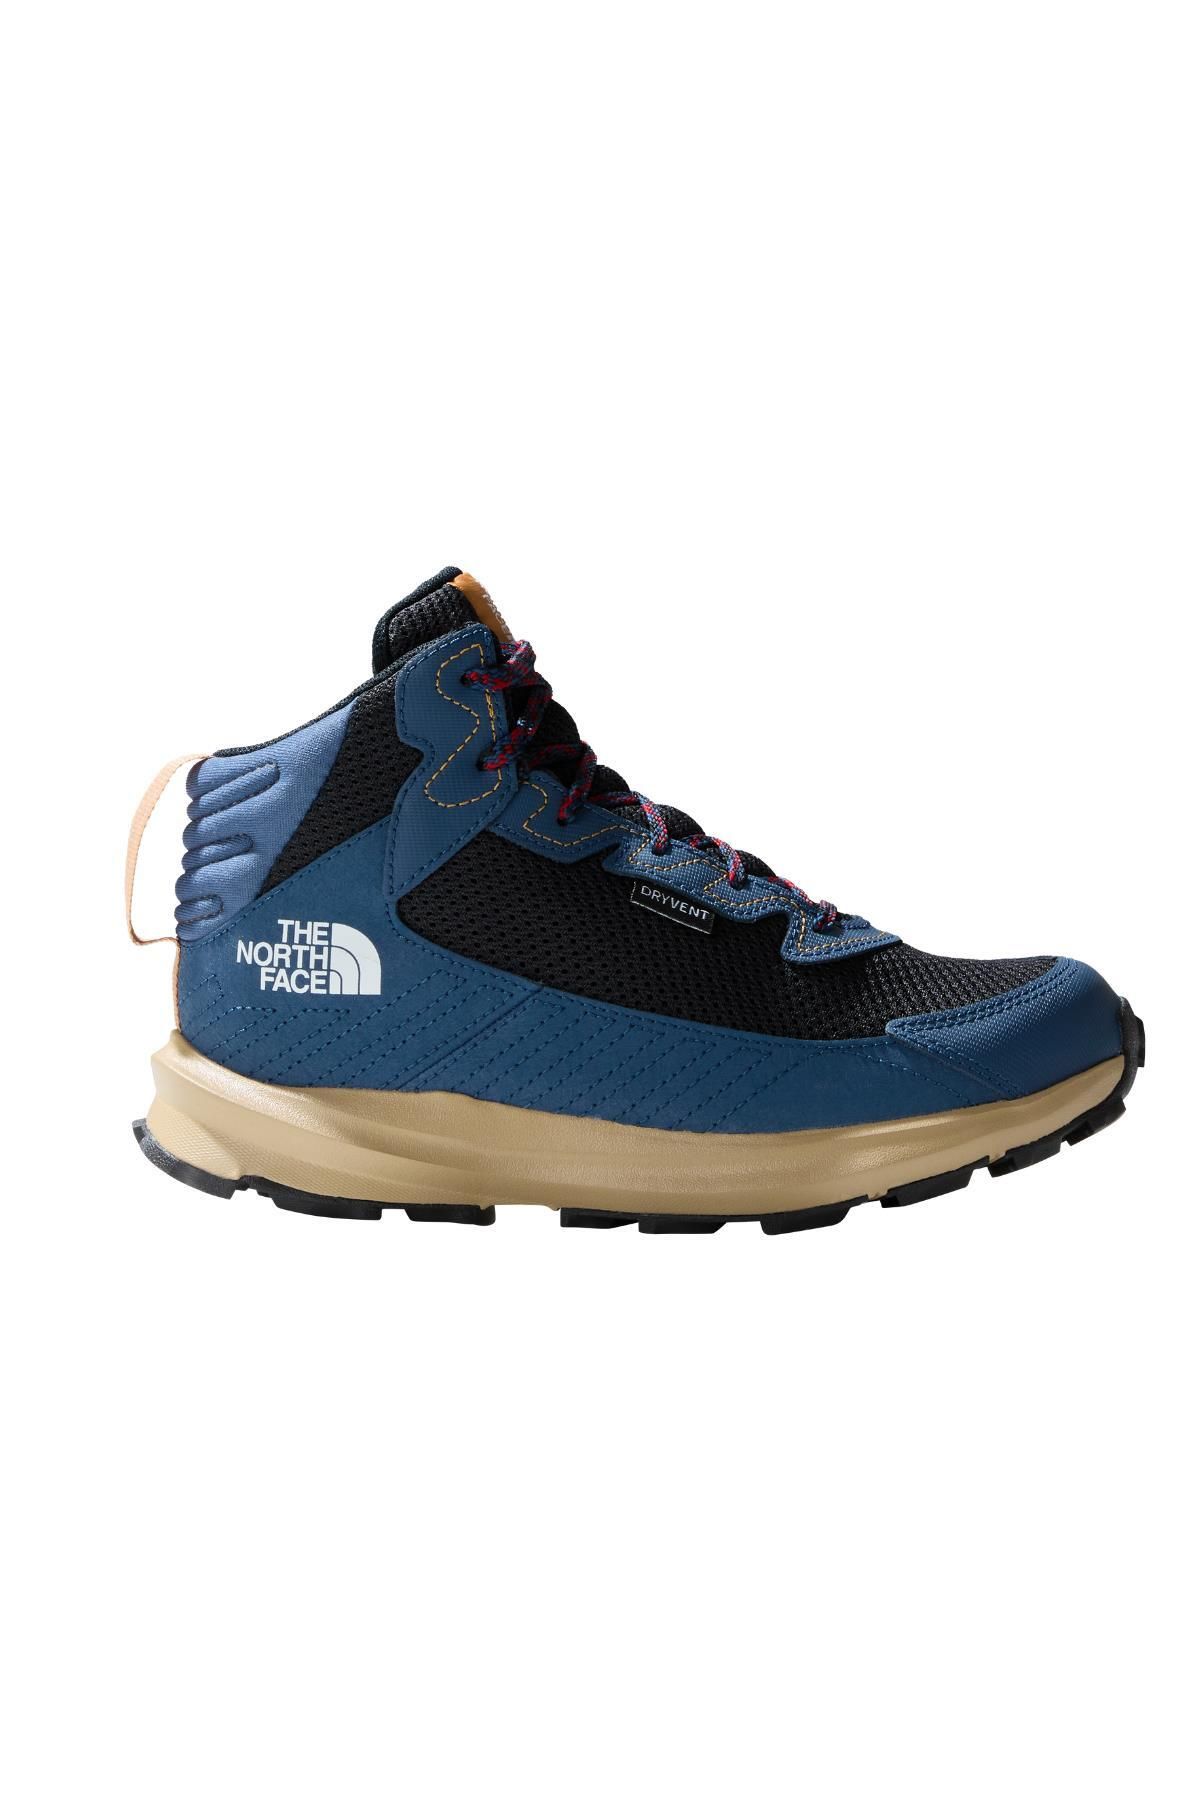 The North Face Y Fastpack Hiker Mid Wp Çocuk Bot